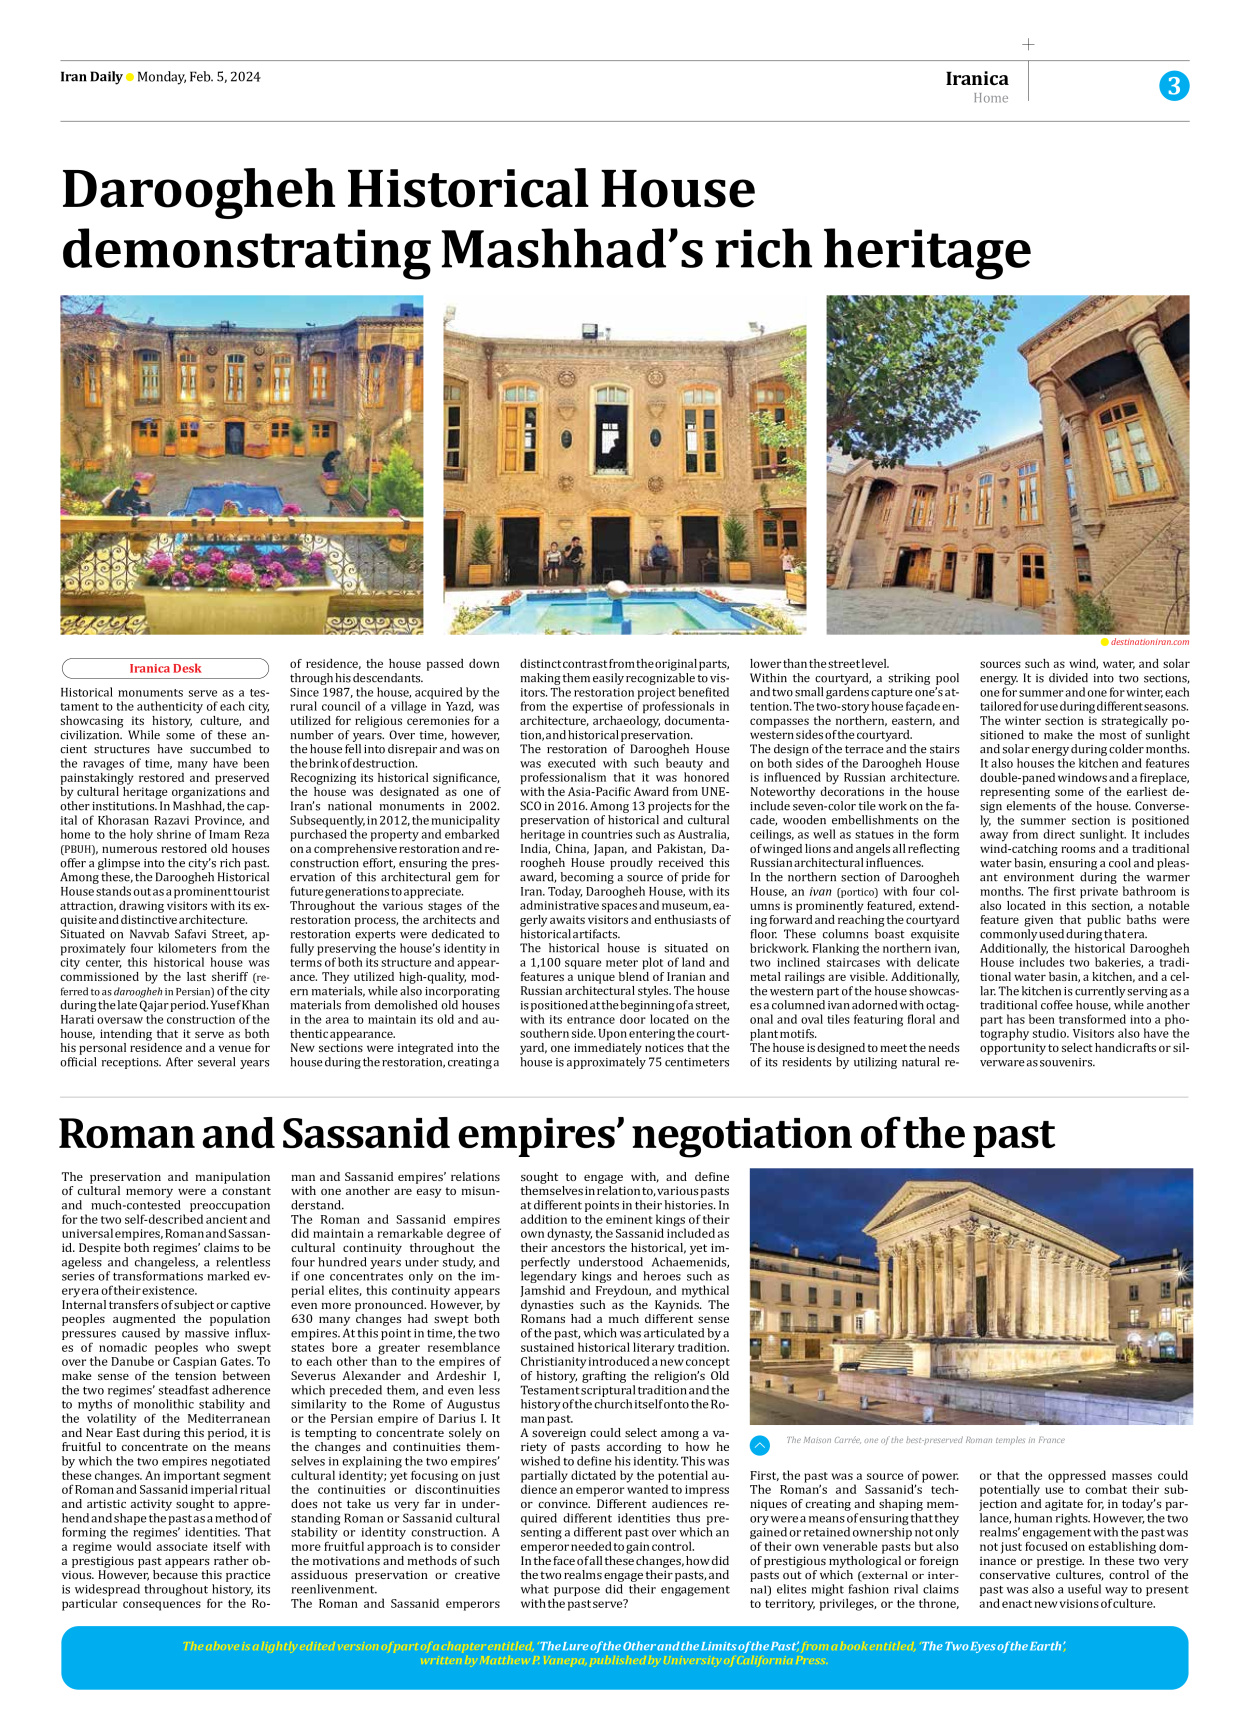 Iran Daily - Number Seven Thousand Five Hundred and Two - 05 February 2024 - Page 3